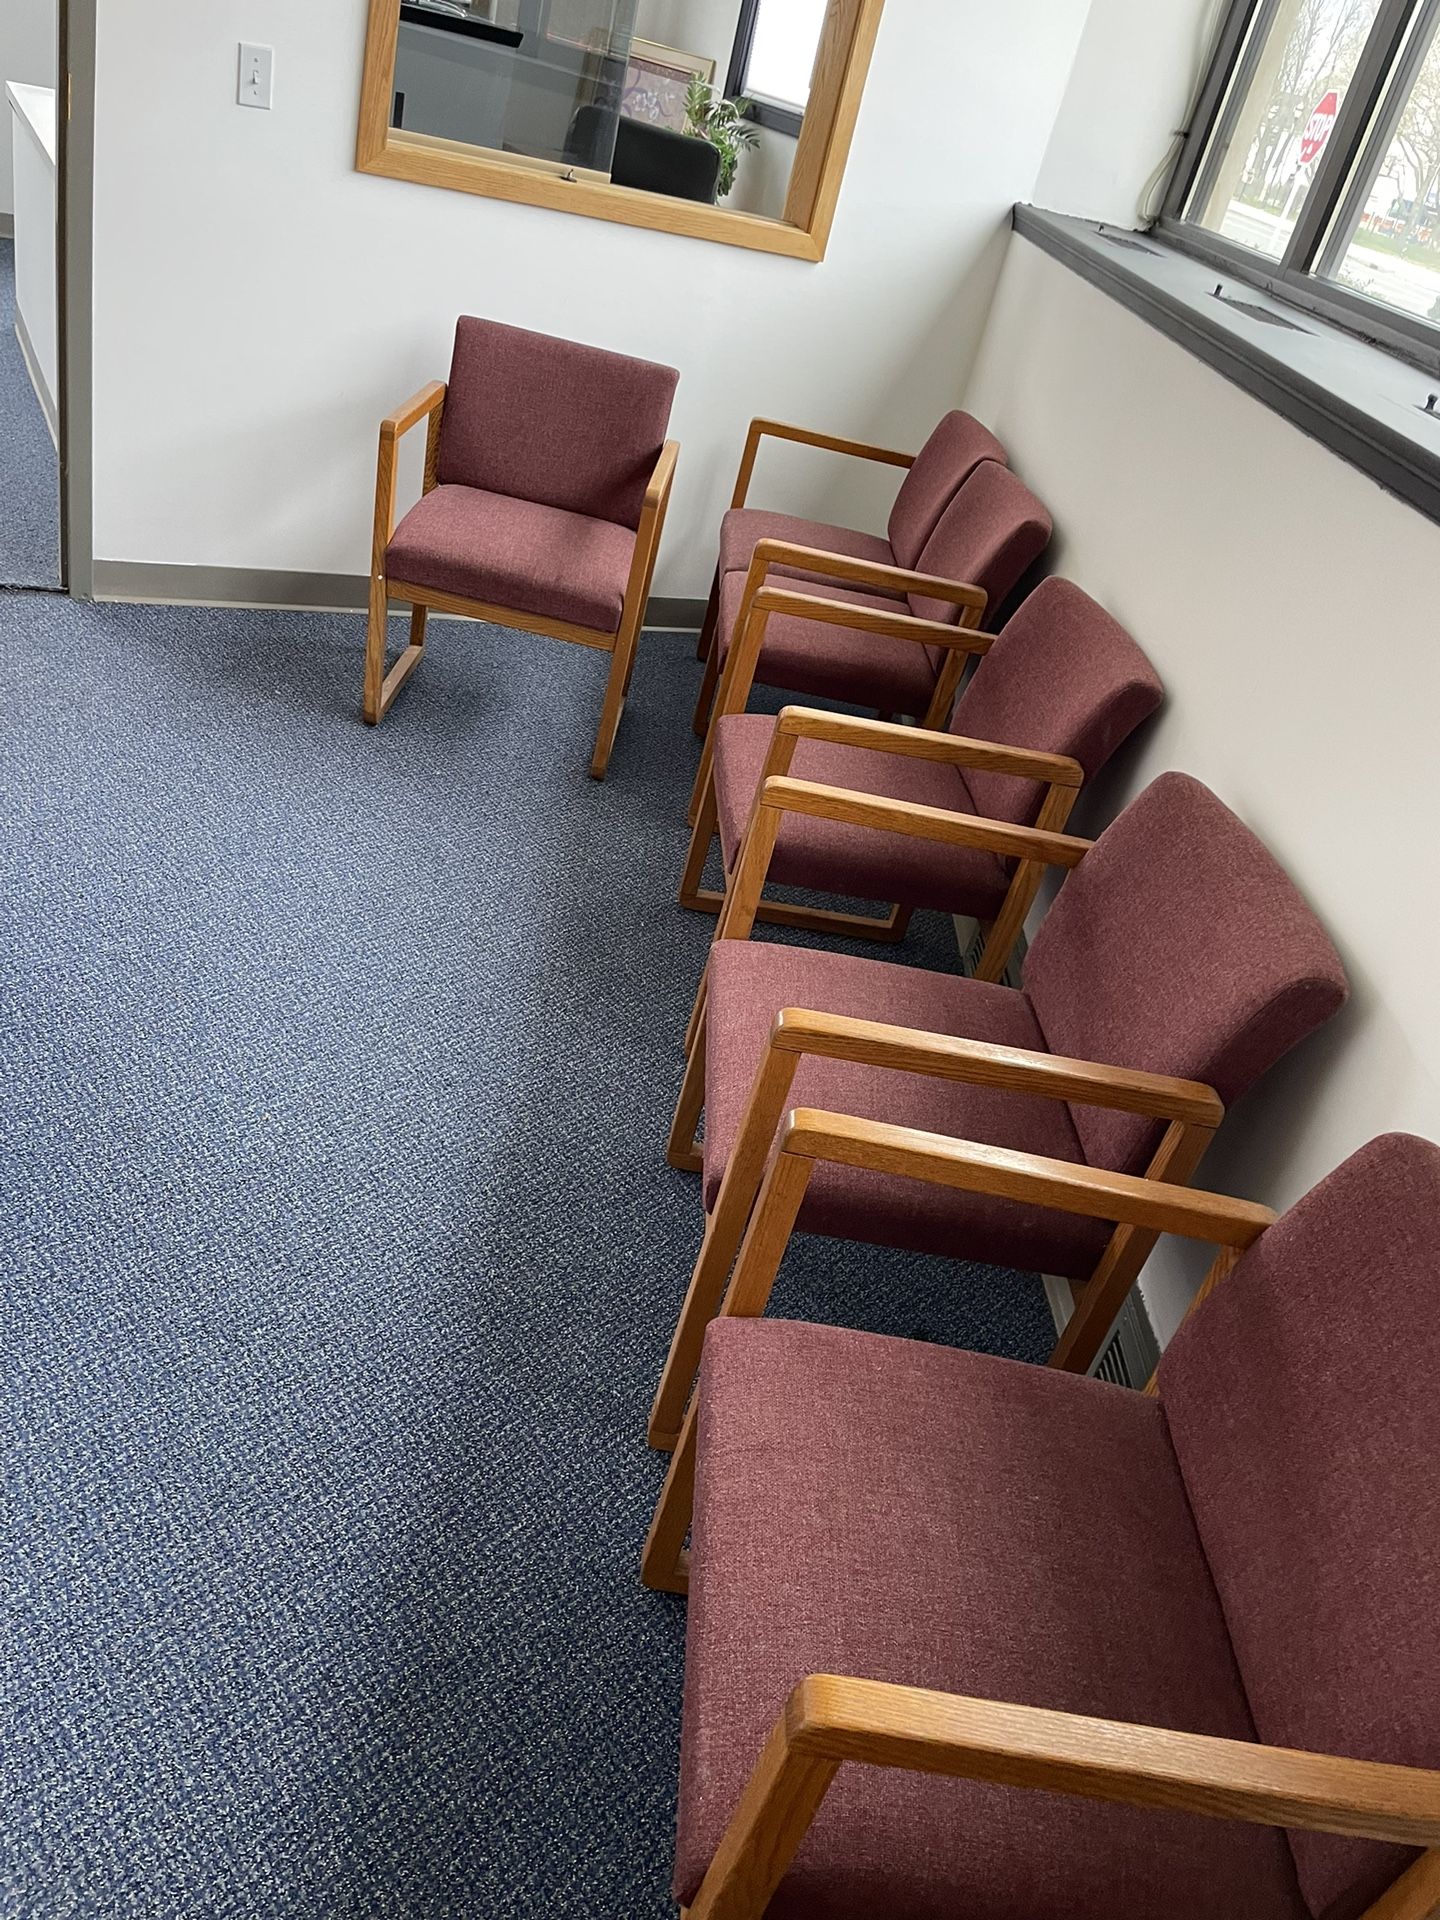 Office Waiting Room Chairs